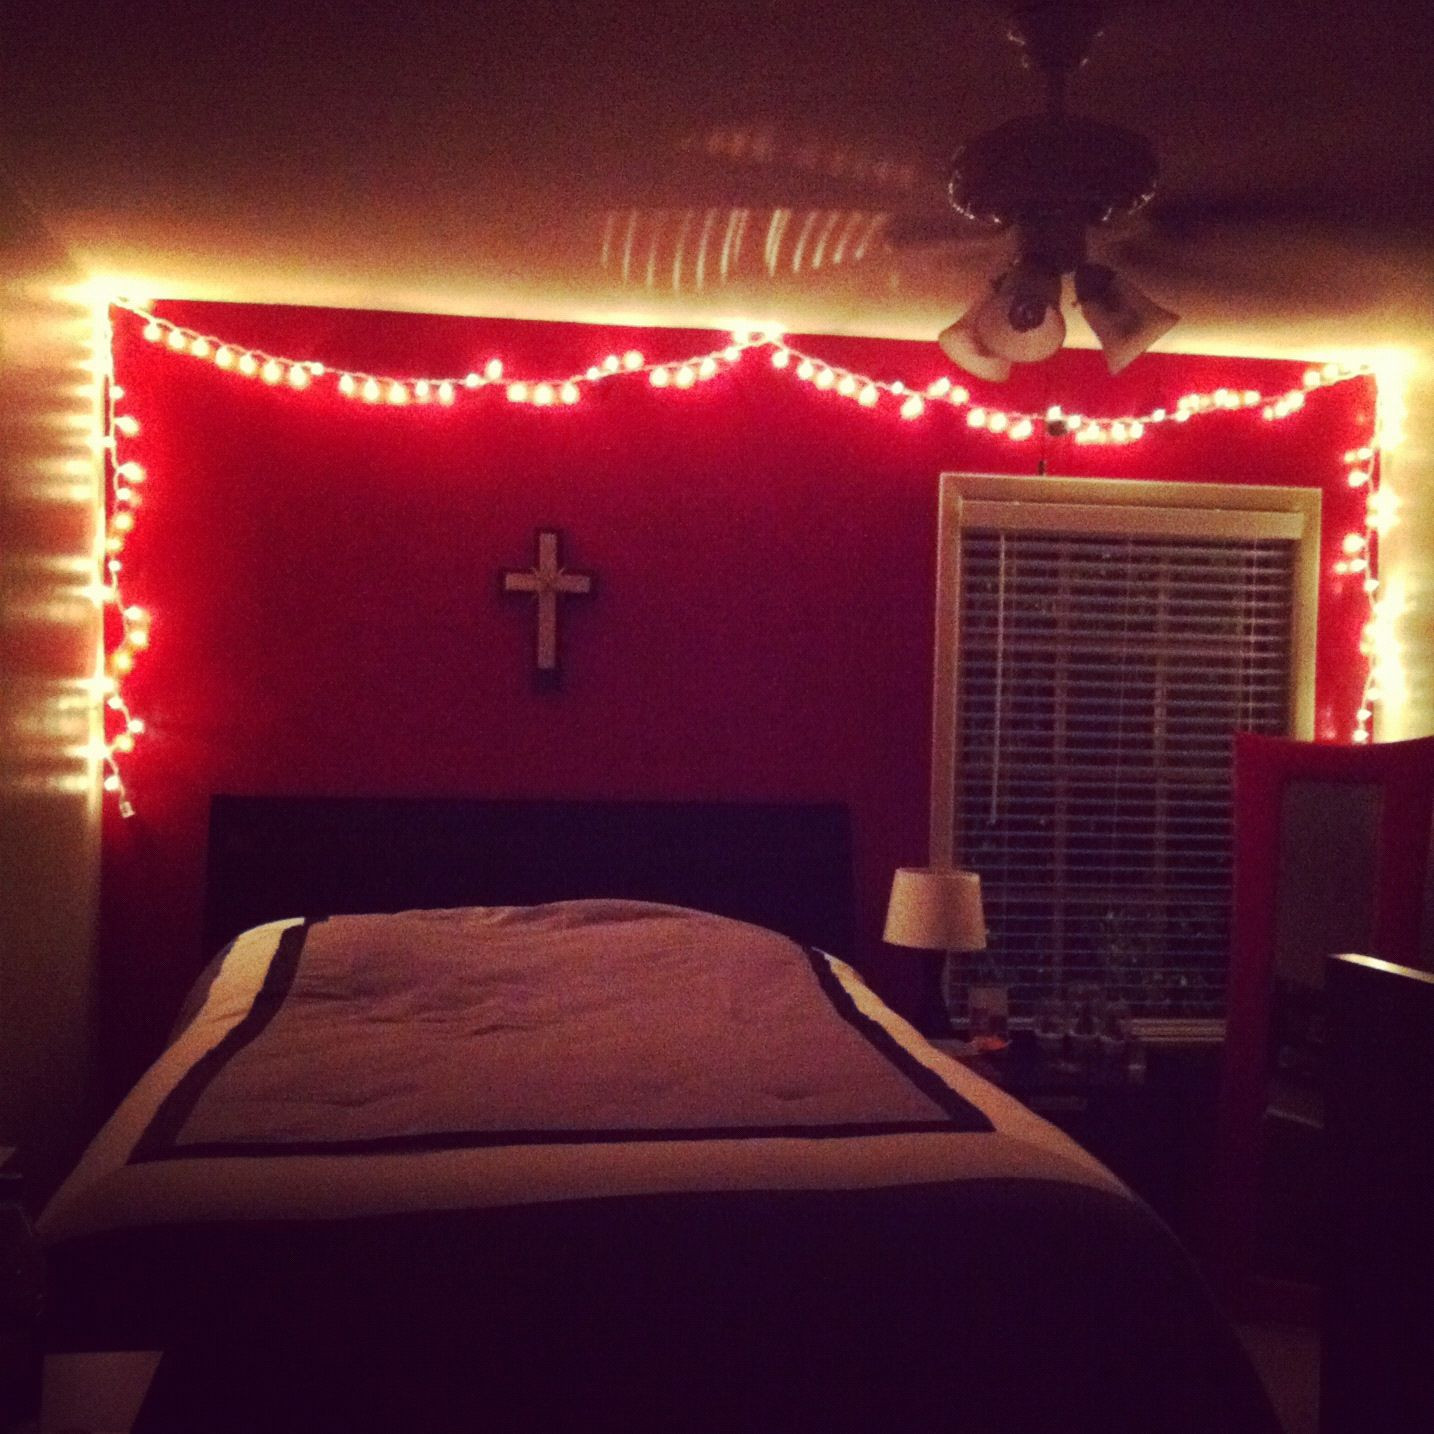 Red Light Bulb In Bedroom
 Christmas lights in my bedroom I love it Especially with